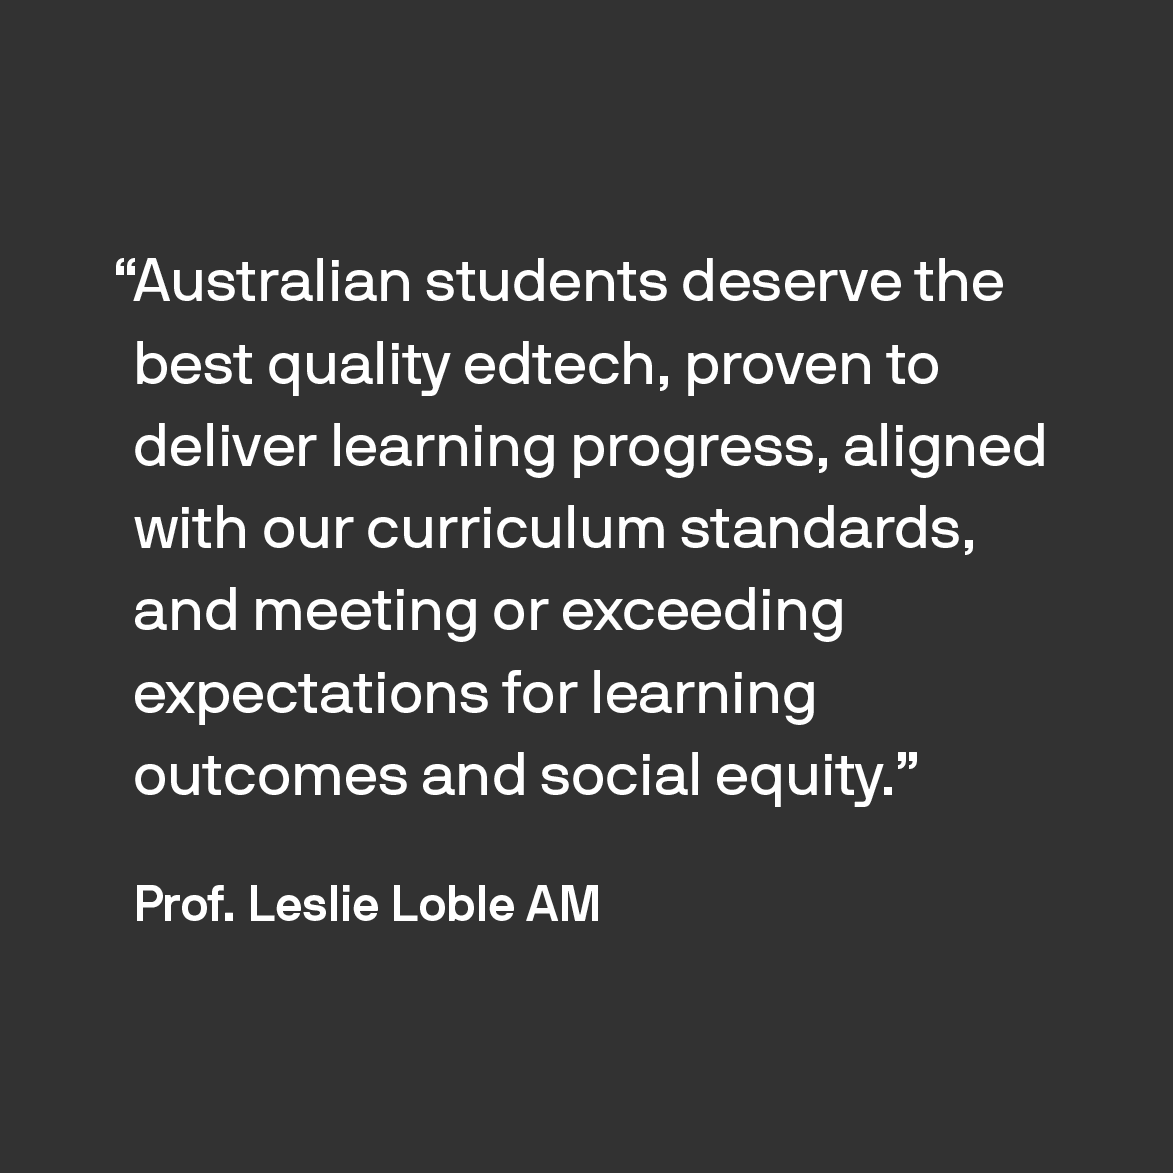 "Australian students deserve the best quality edtech, proven to deliver learning progress, aligned with our curriculum standards, and meeting or exceeding expectations for learning outcomes and social equity." Prof. Leslie Loble AM